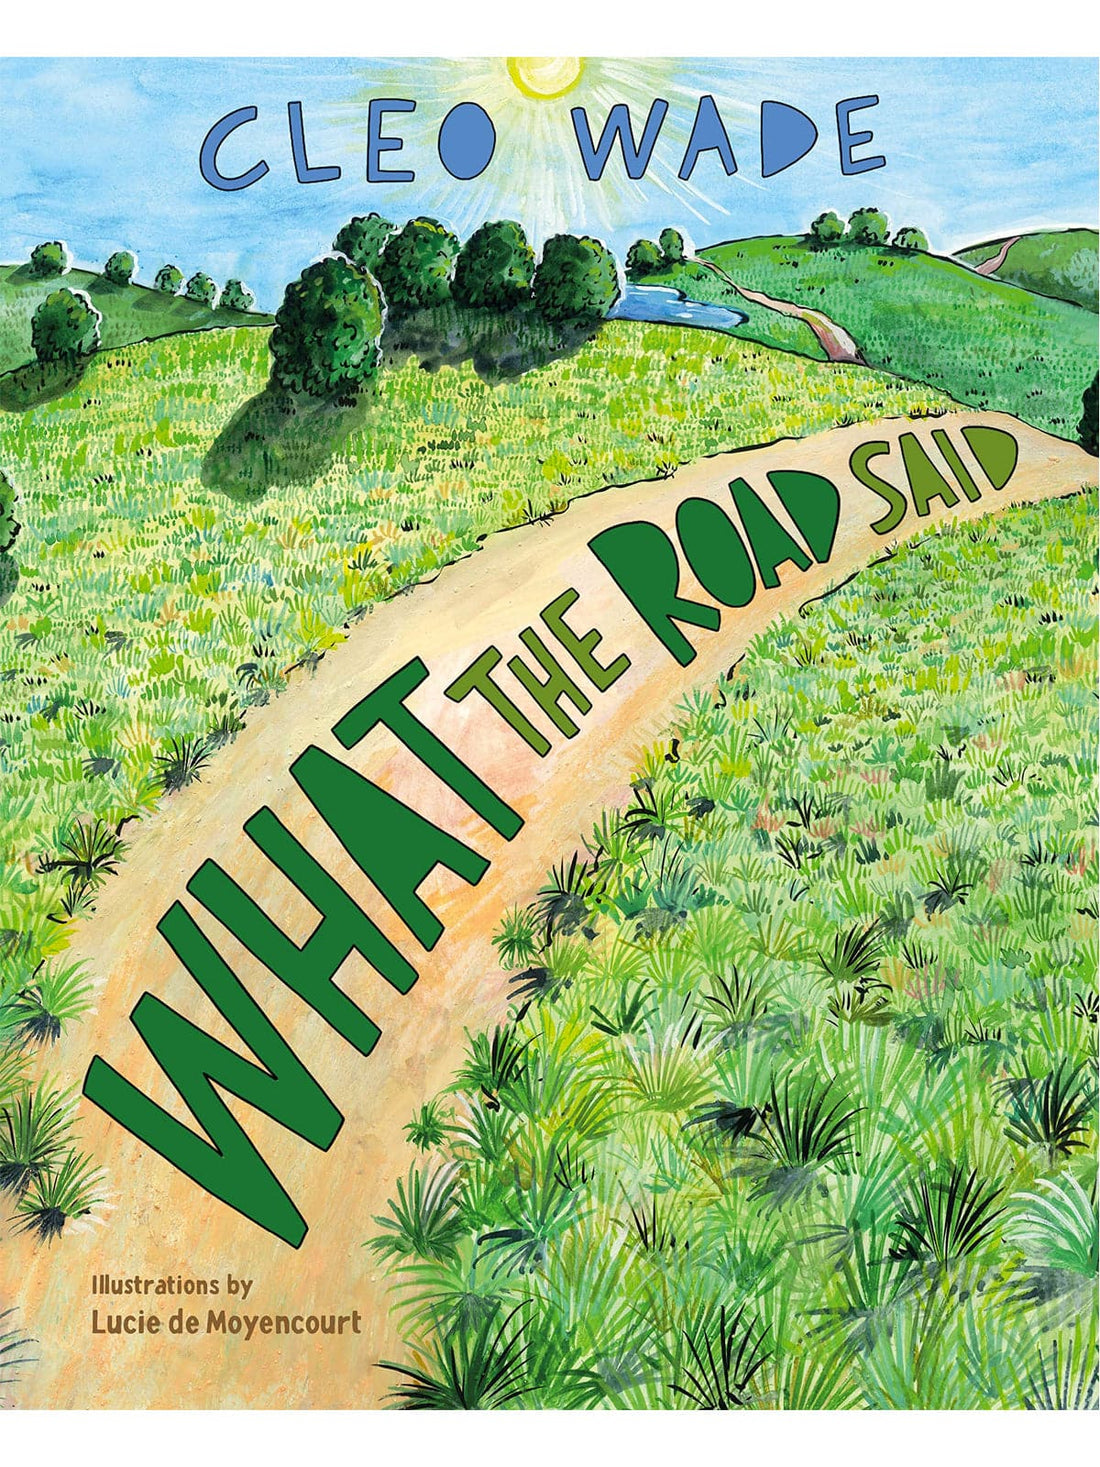 WHAT THE ROAD SAID